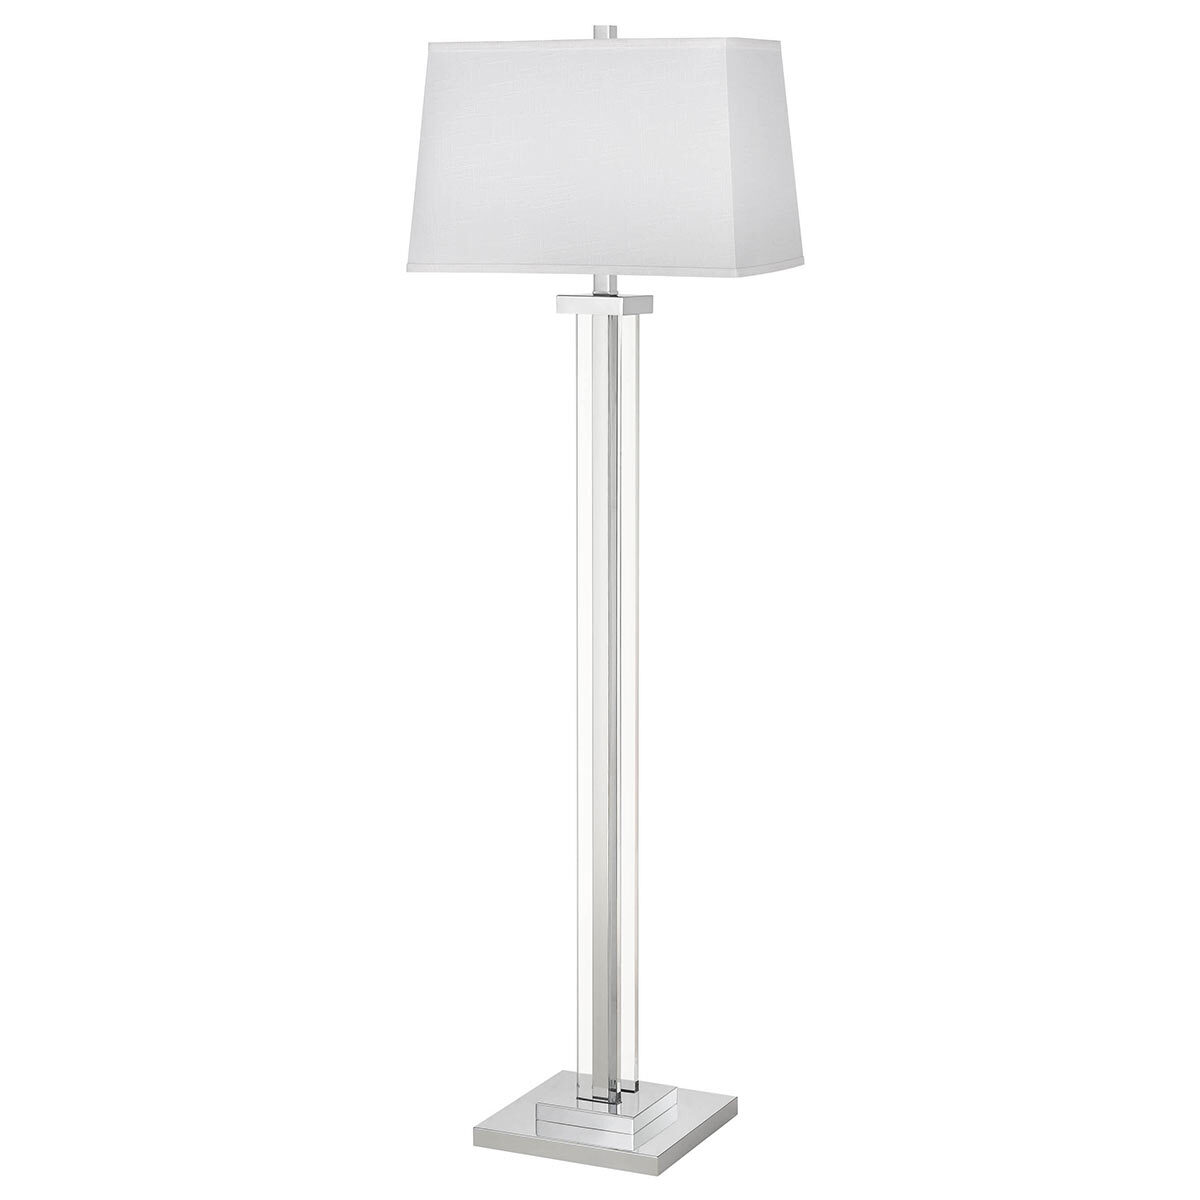 Cut Out Image of Kate Floor Lamp with Light Off